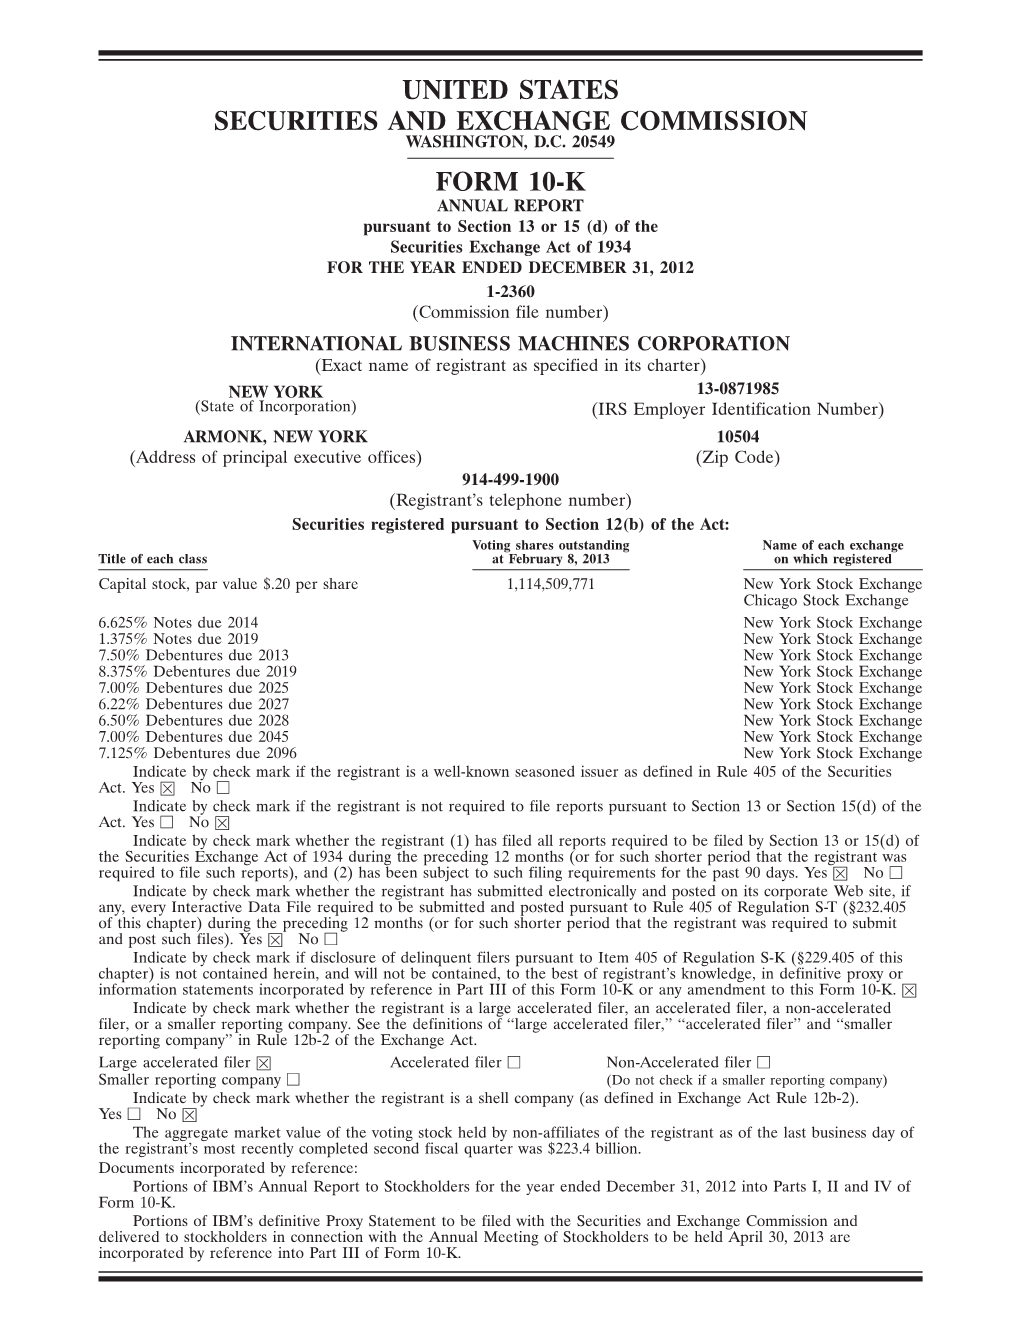 United States Securities and Exchange Commission Form 10-K